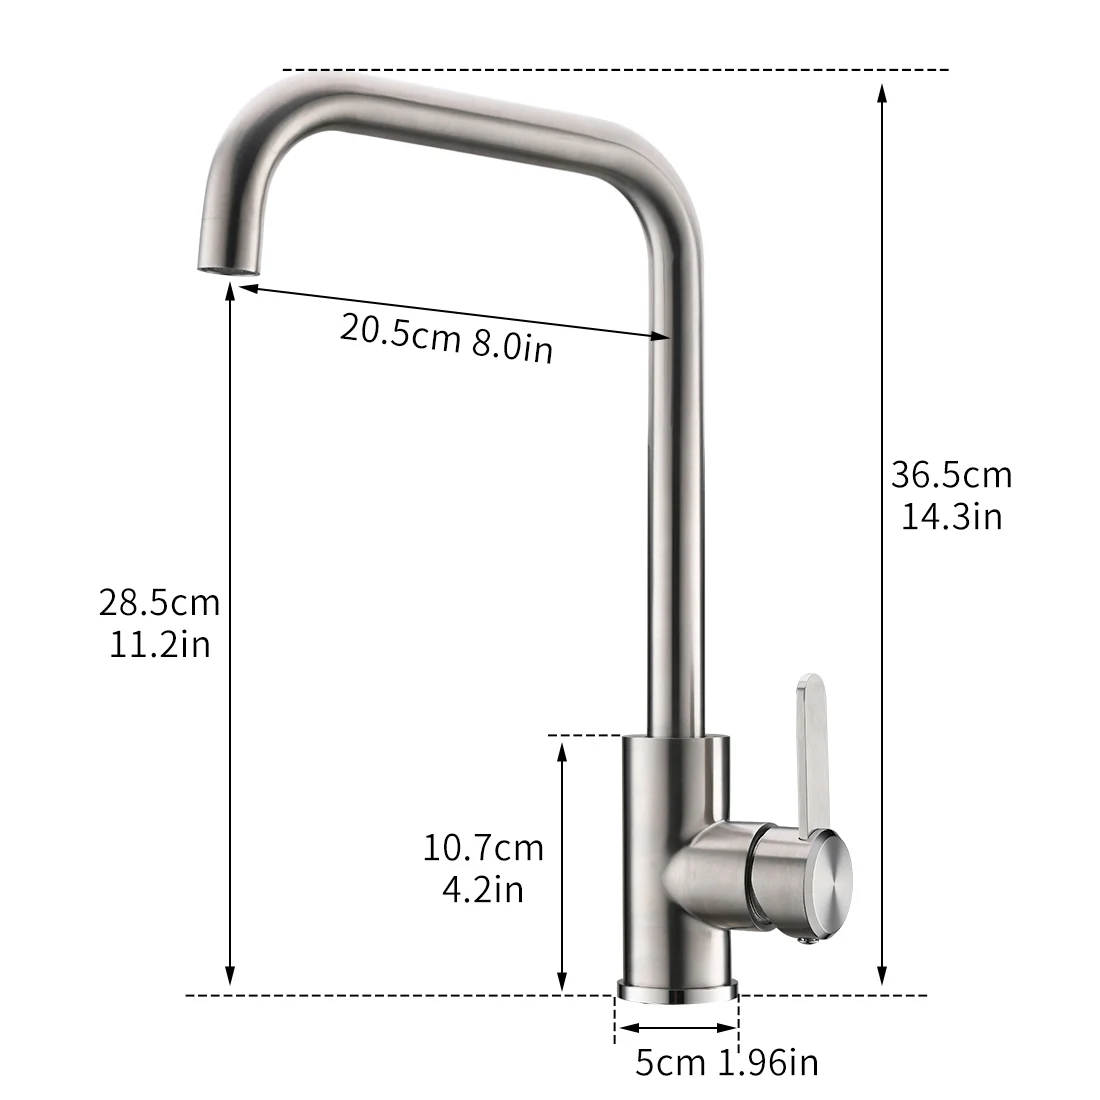 360 Degree Swivel Modern Hot& Cold Mixer Stainless Steel Single Handle Brushed Nickel Kitchen Sink Faucet